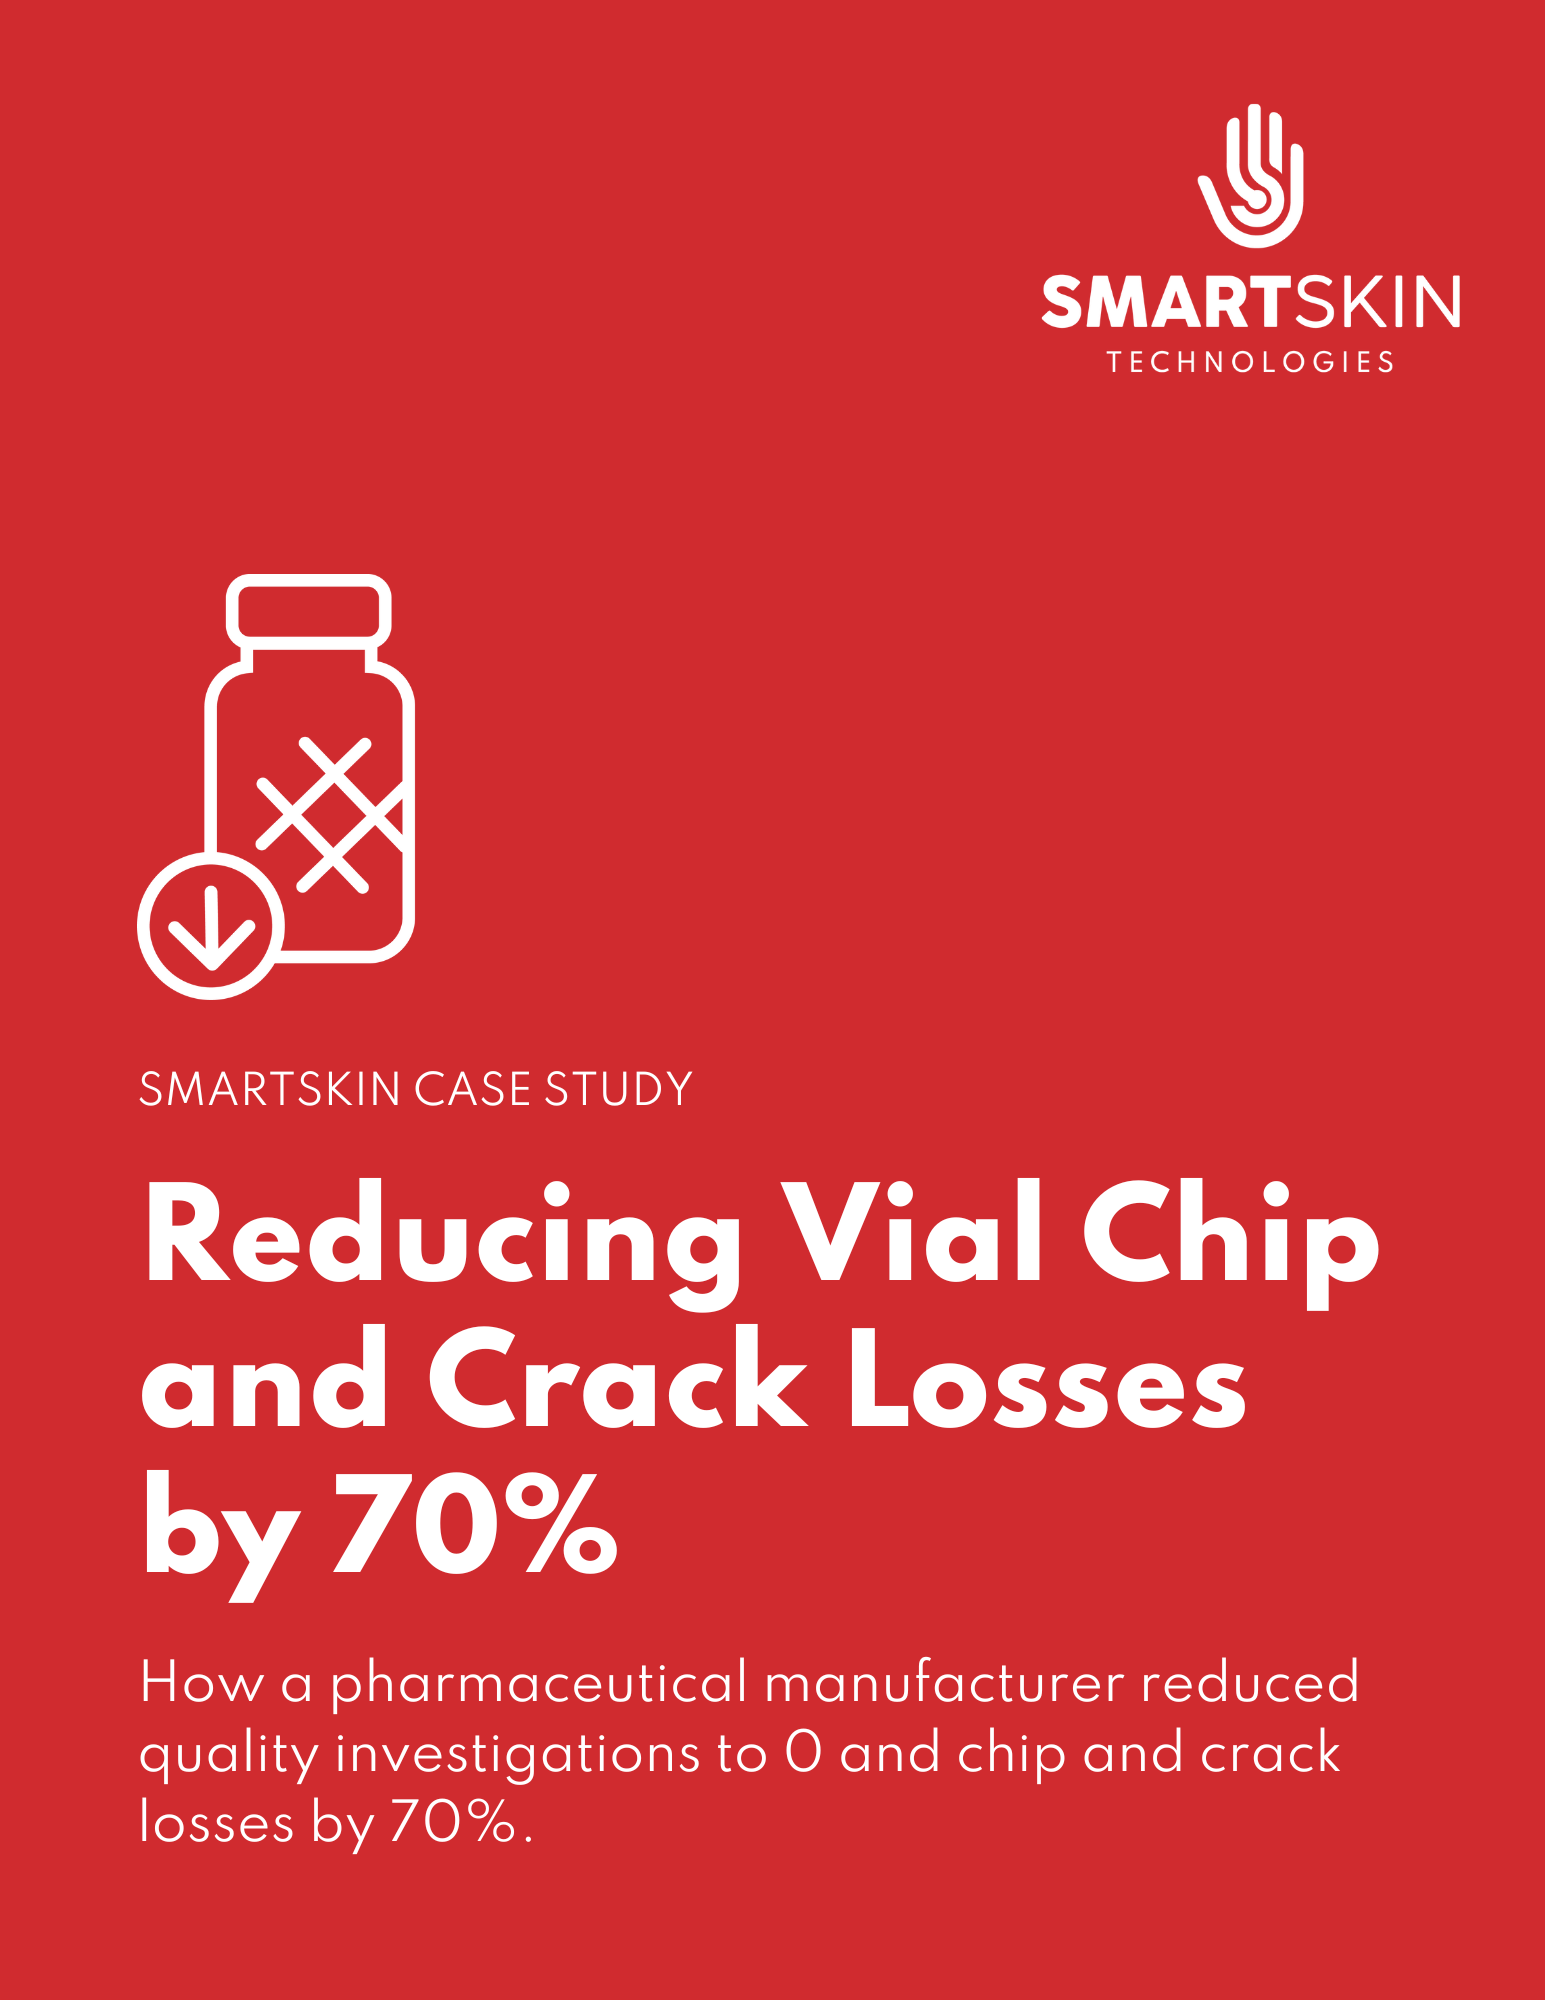 Reducing vial chip and crack losses by 70%